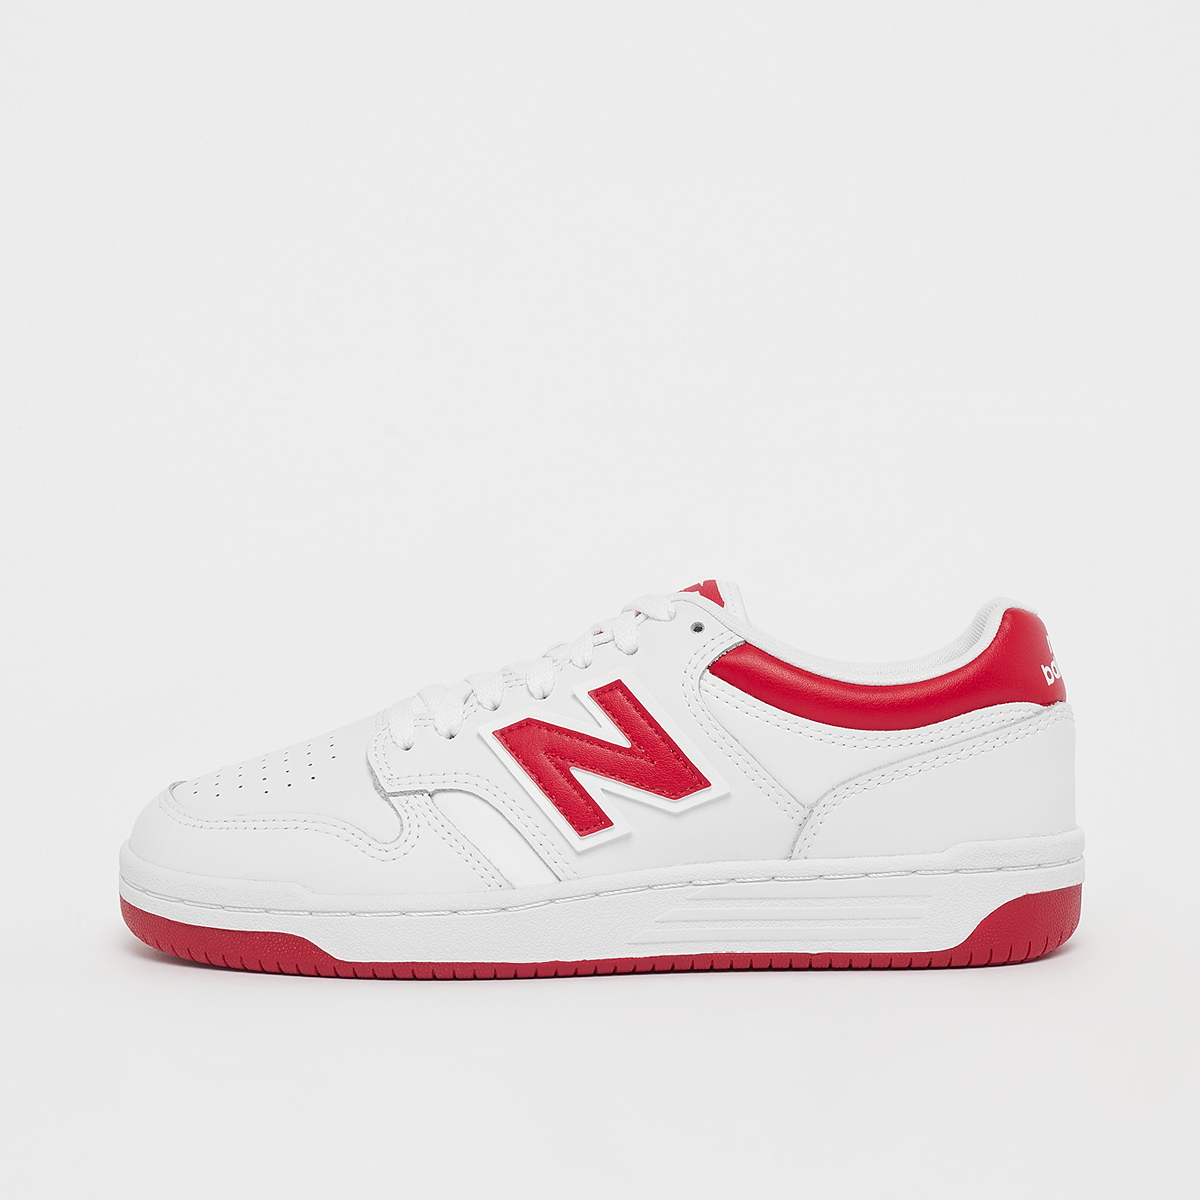 480L, New Balance, Footwear, white/red, taille: 37